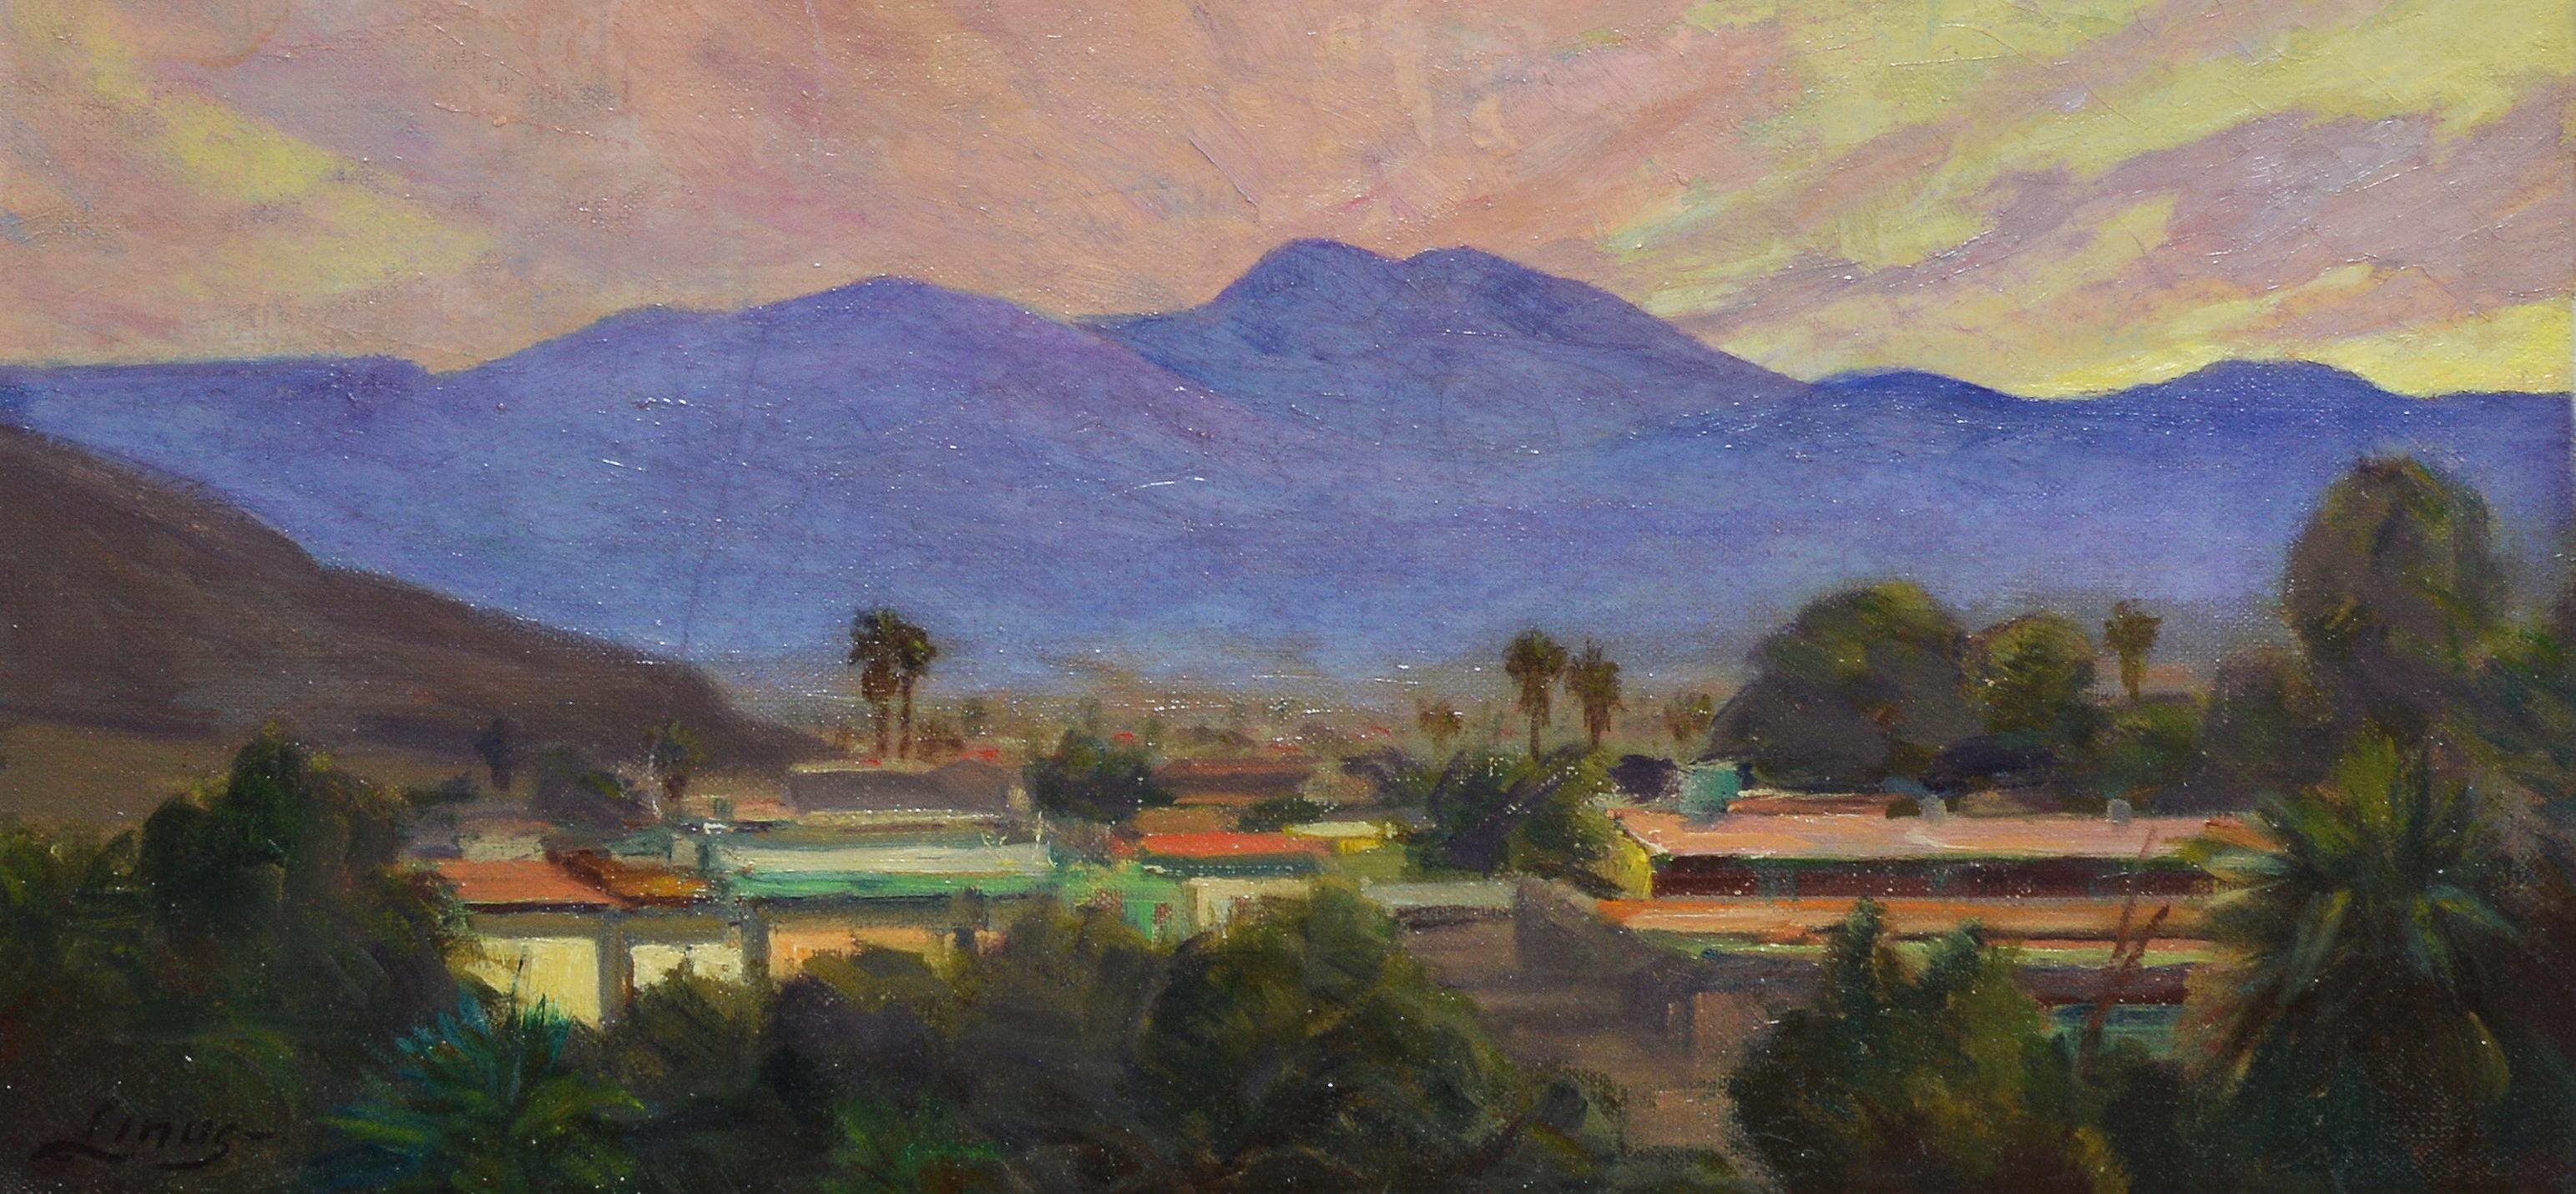 Antique California Desert Valley Sunset Oil Painting by Axel Linus 1